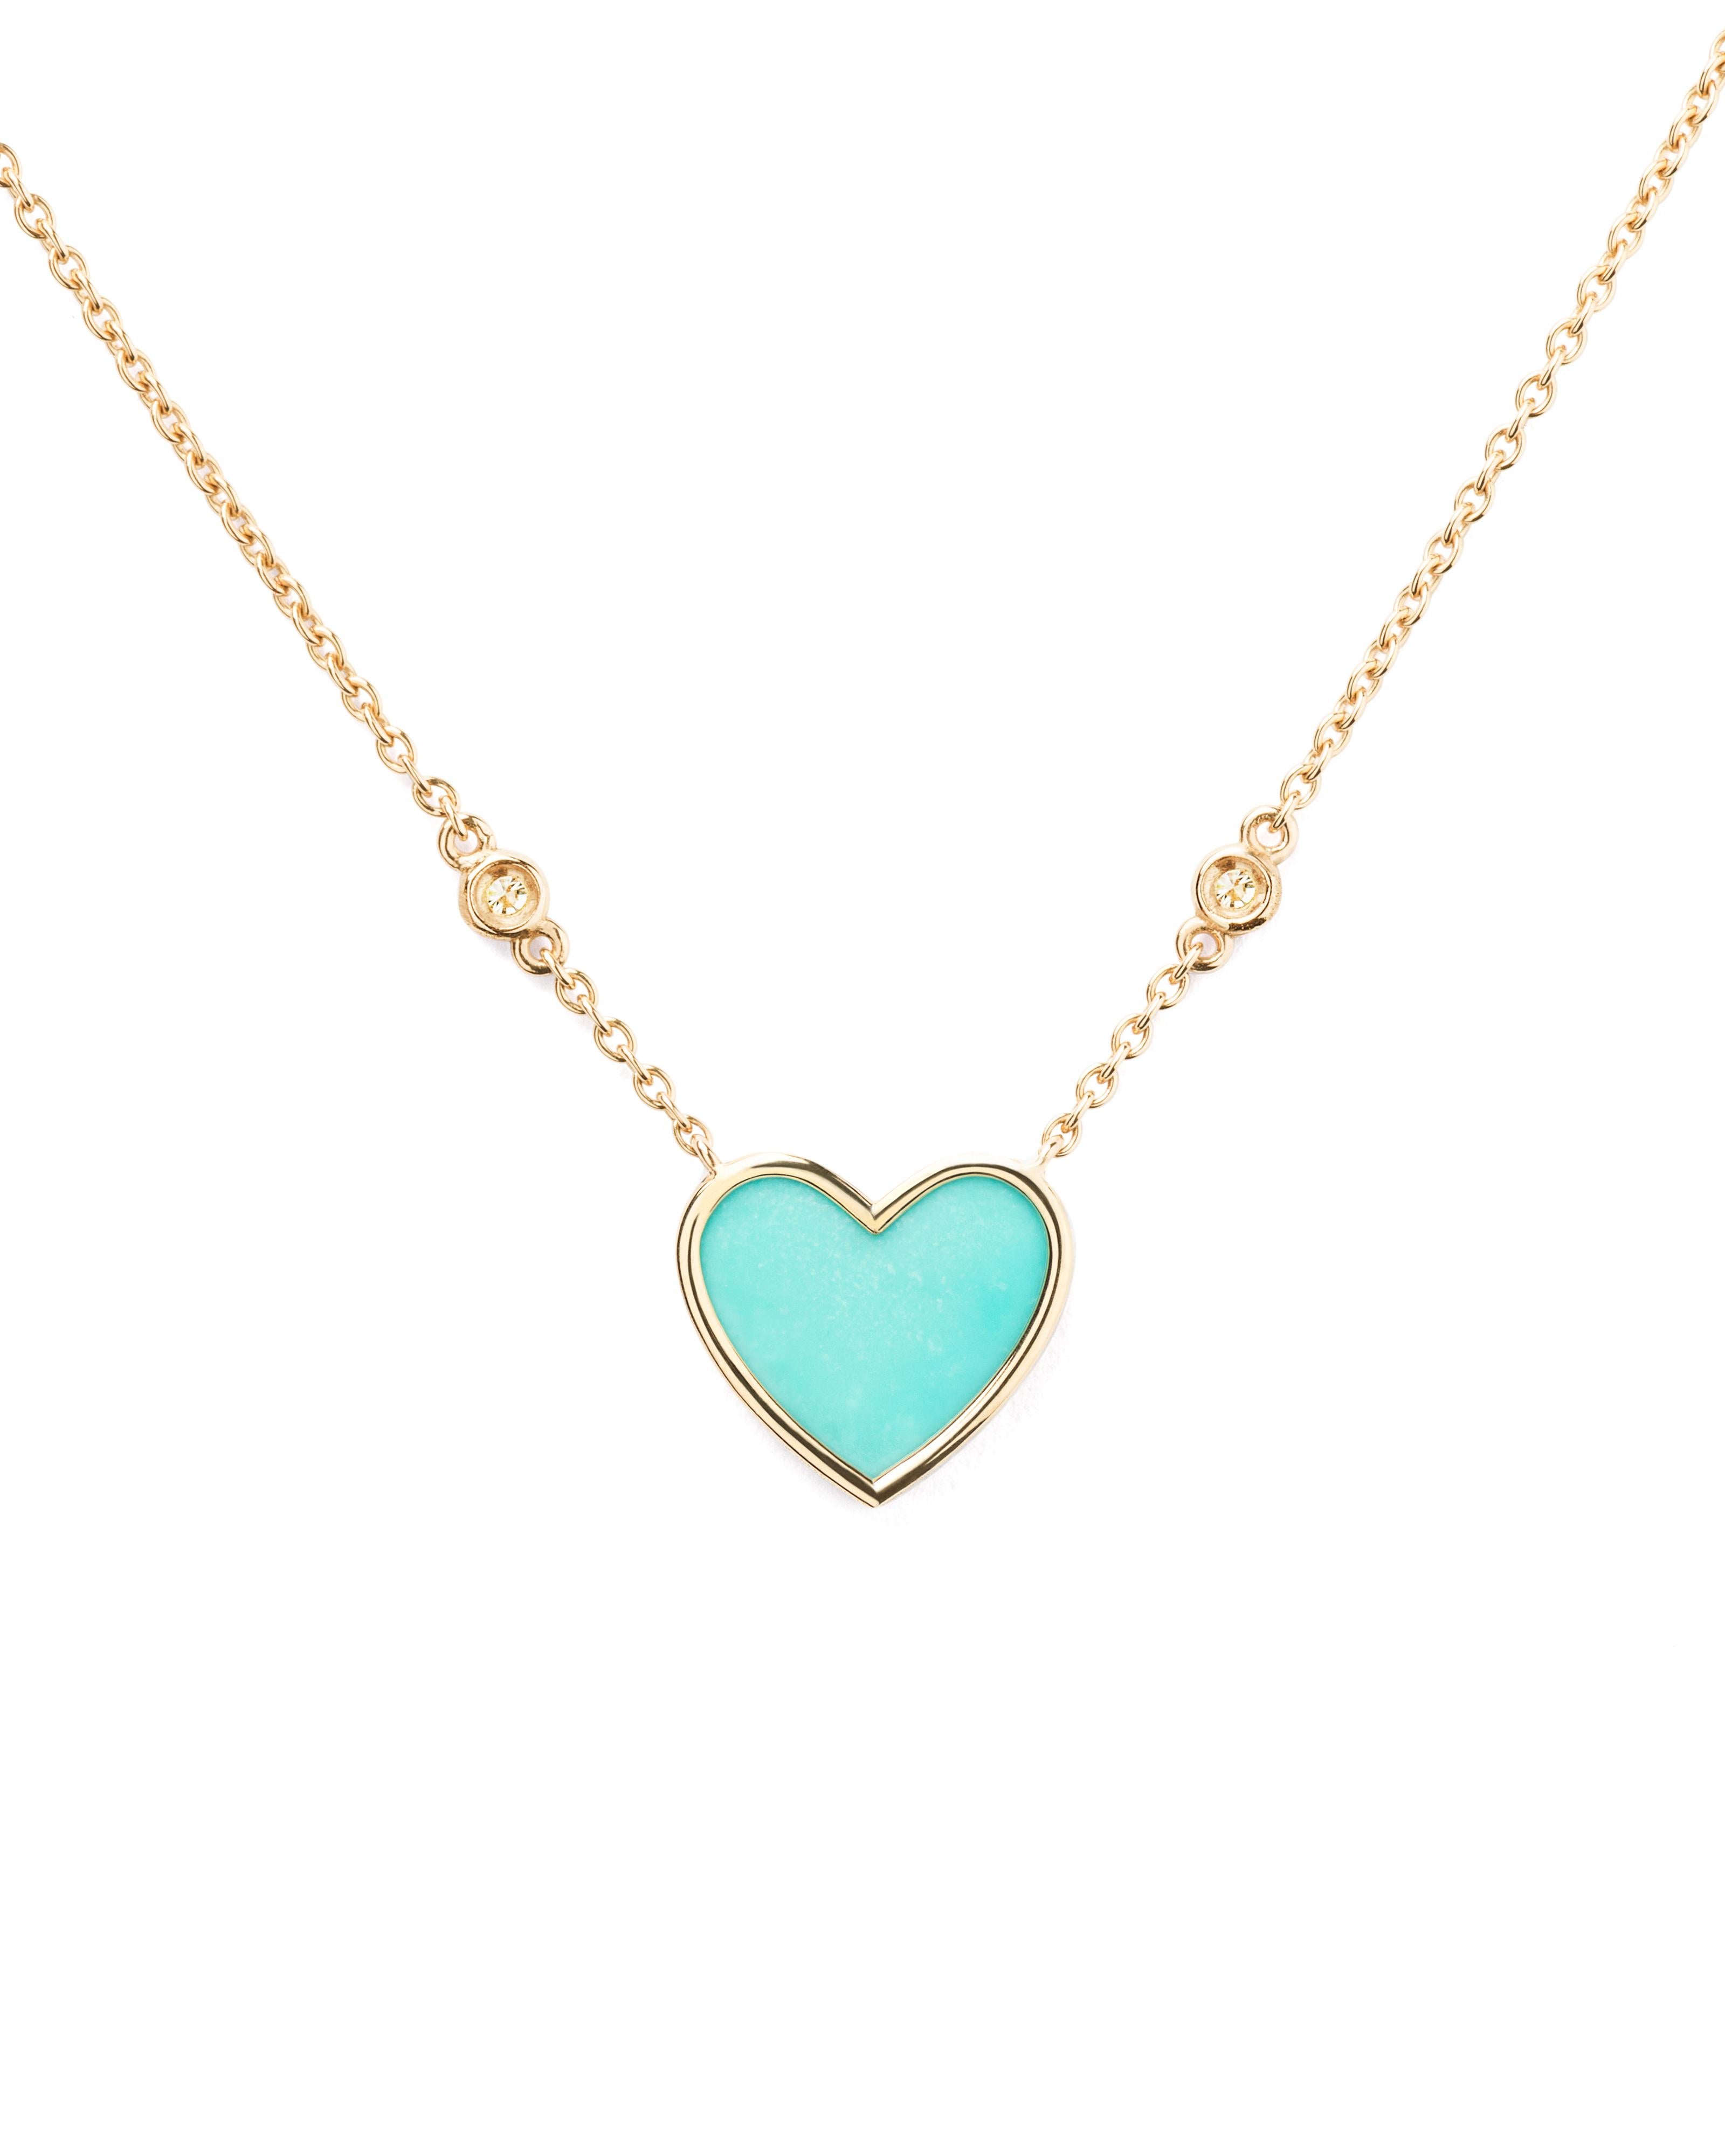 L'Attrape-Coeur collection plays with the colors of love. Its rounded gold borders embrace the purity of diamonds, the nuances of opal, turquoise or lapis lazuli.

L'Attrape Coeur necklace in yellow gold with turquoise and diamonds.

Gold weight :